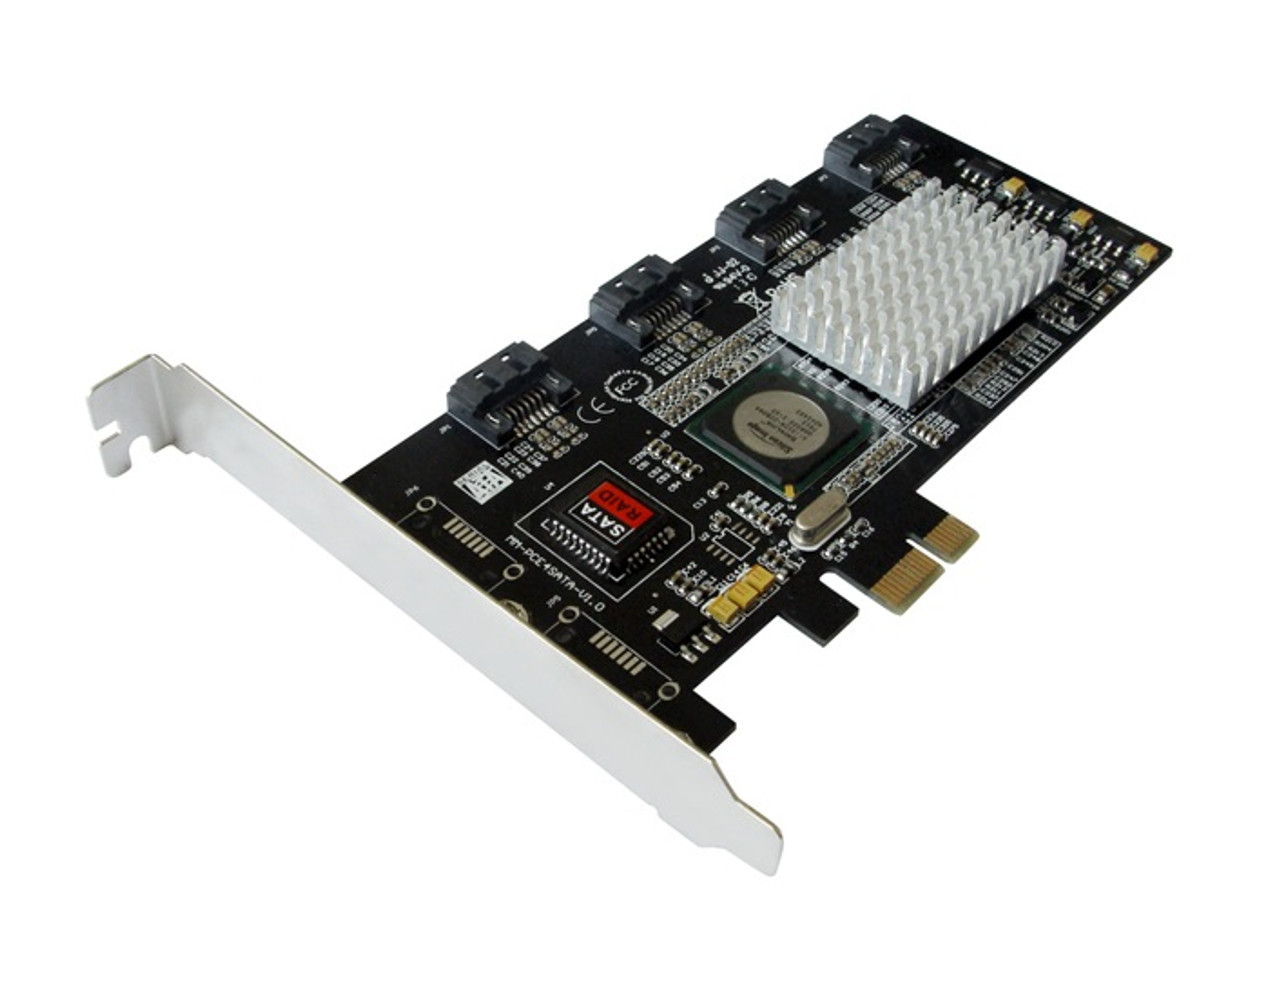 405-AACW - Dell PERC H730P 12GB/s PCI-Express 3.0 SAS RAID Controller with 2GB NV Cache